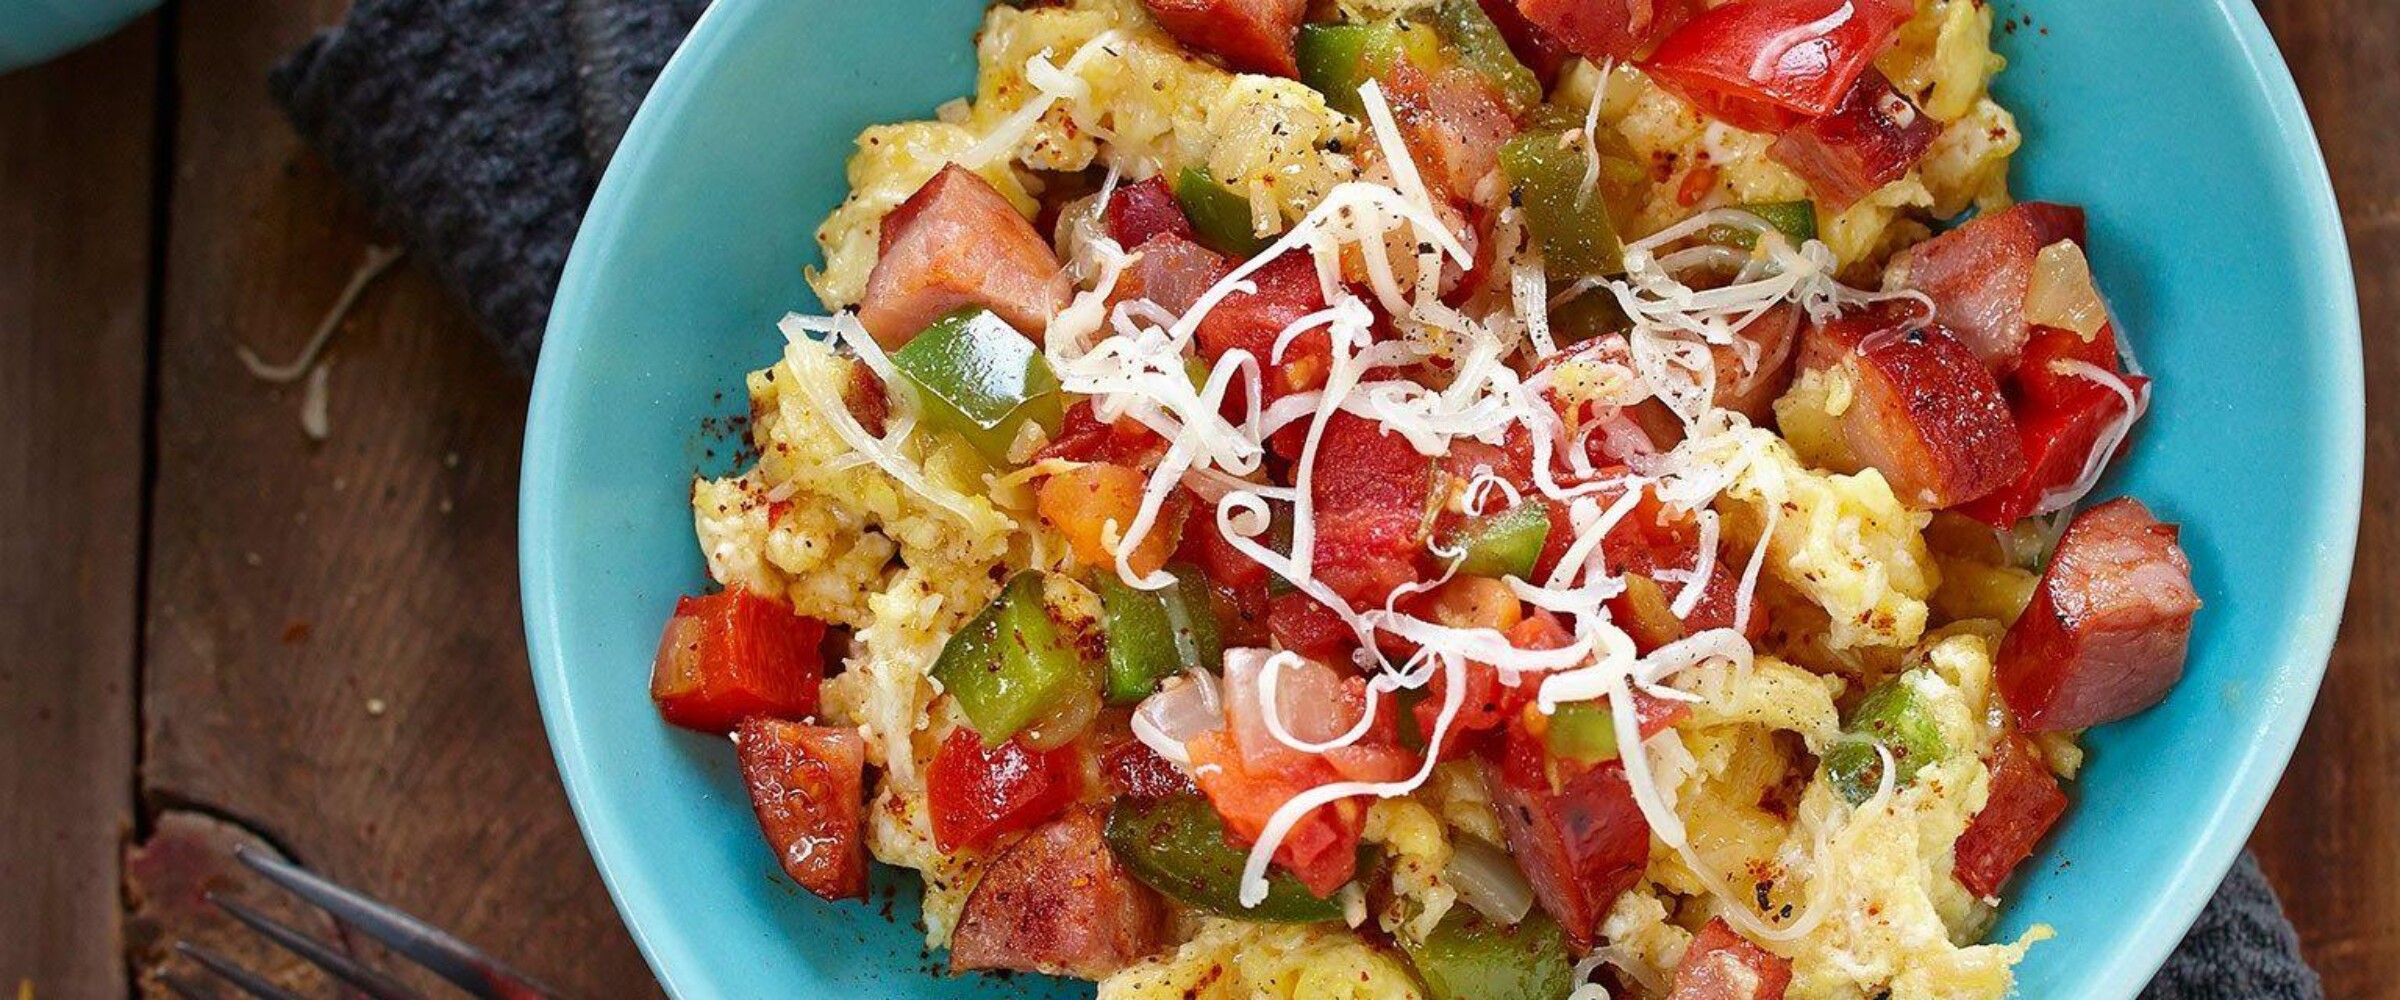 Scrambled eggs with chorizo and vegetables in a blue bowl